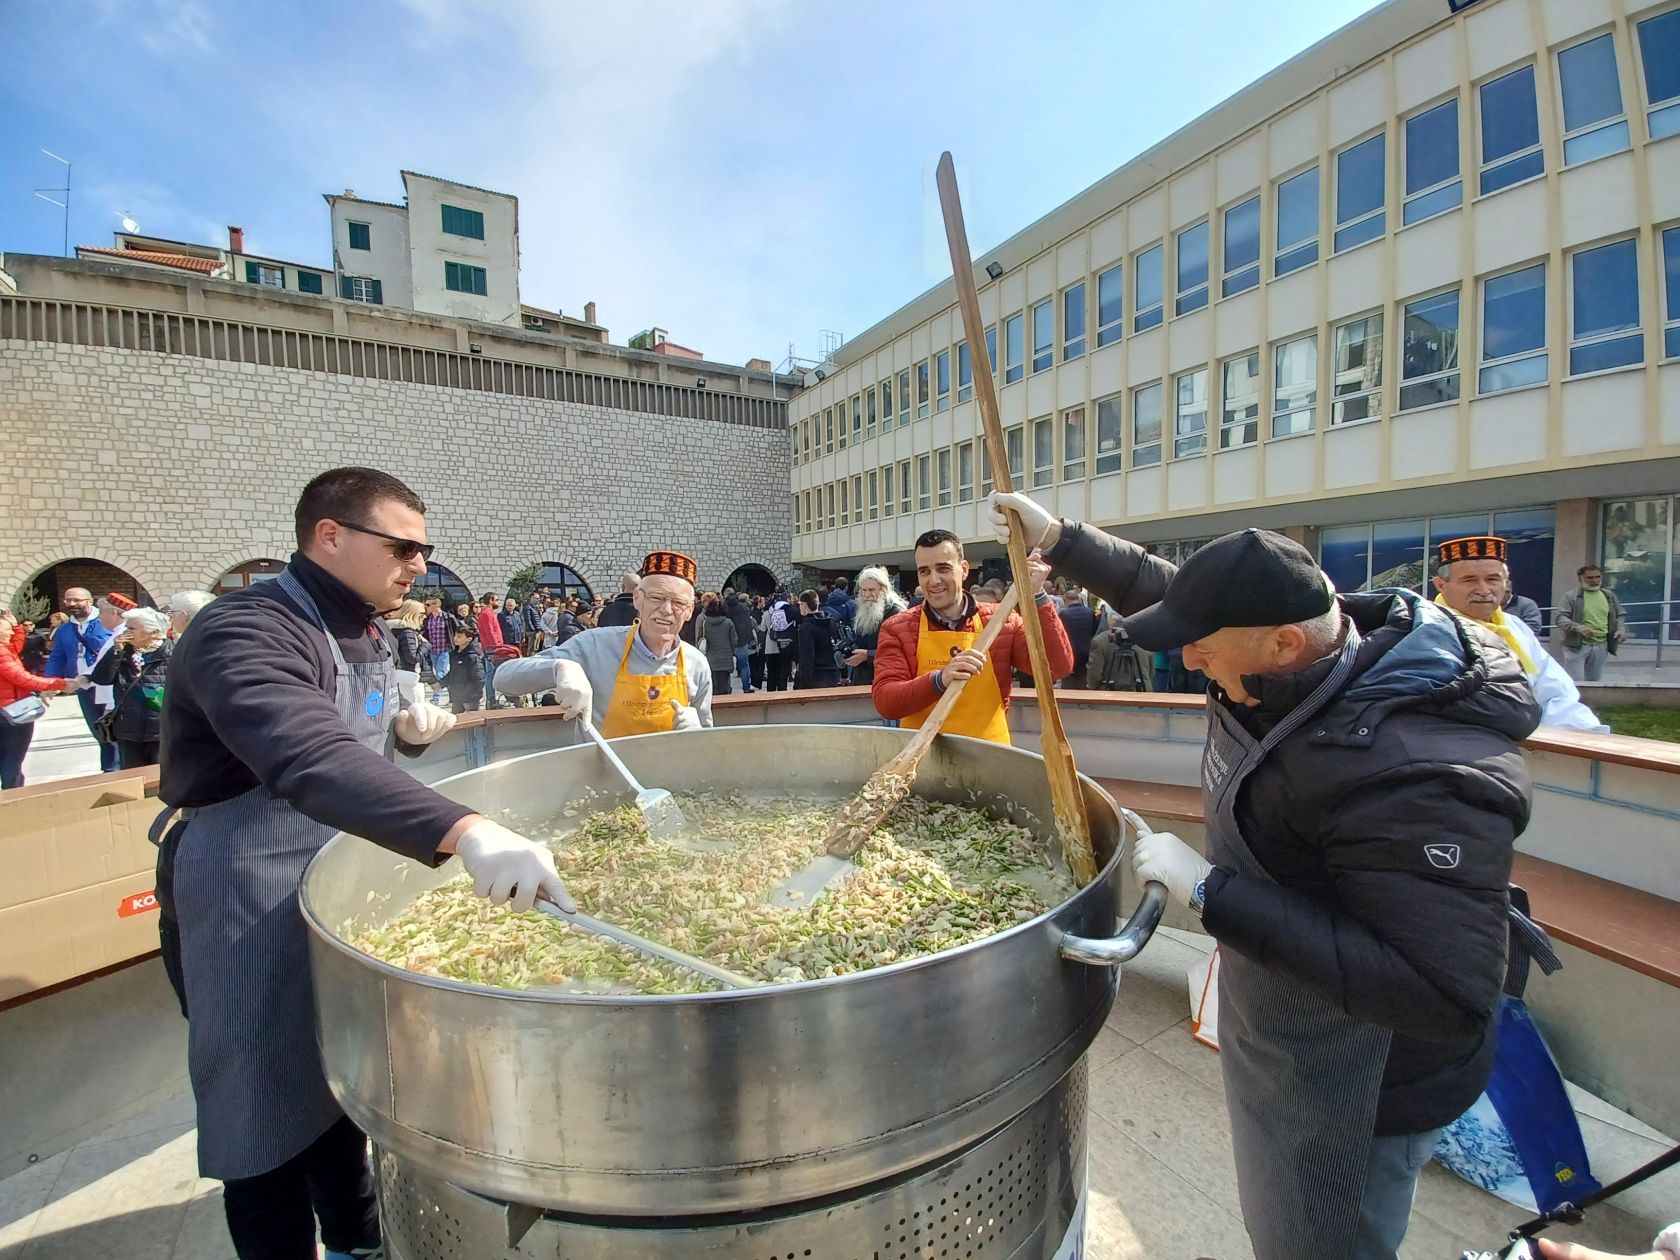 Traditional Easter Monday breakfast for locals and tourists held in Šibenik